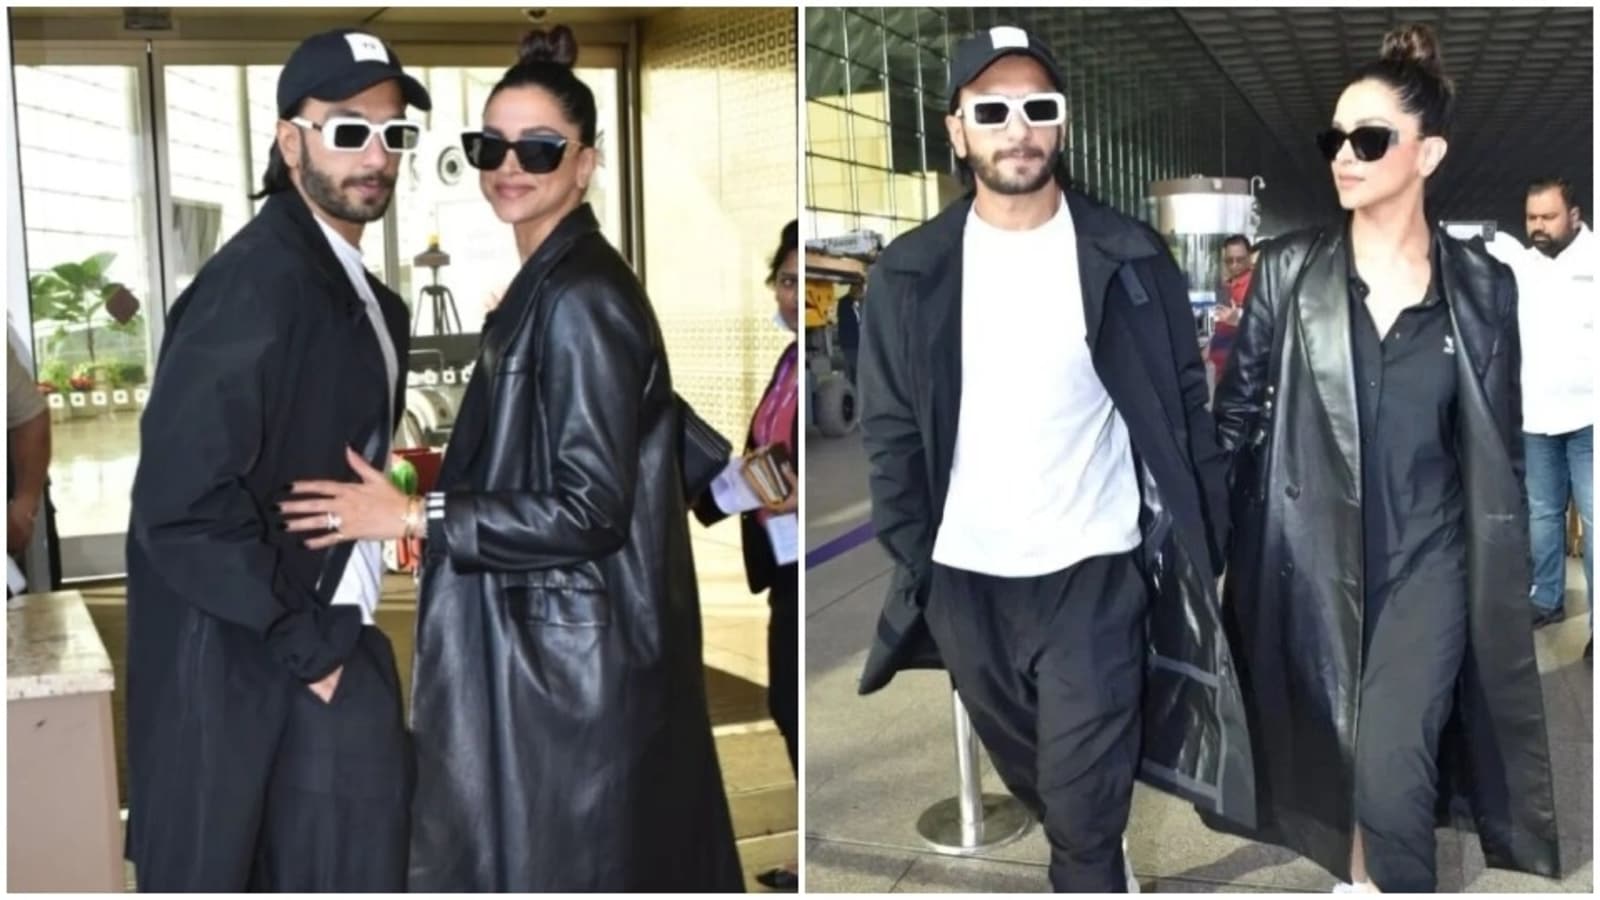 Deepika Padukone's airport look inspiration: White on white with a